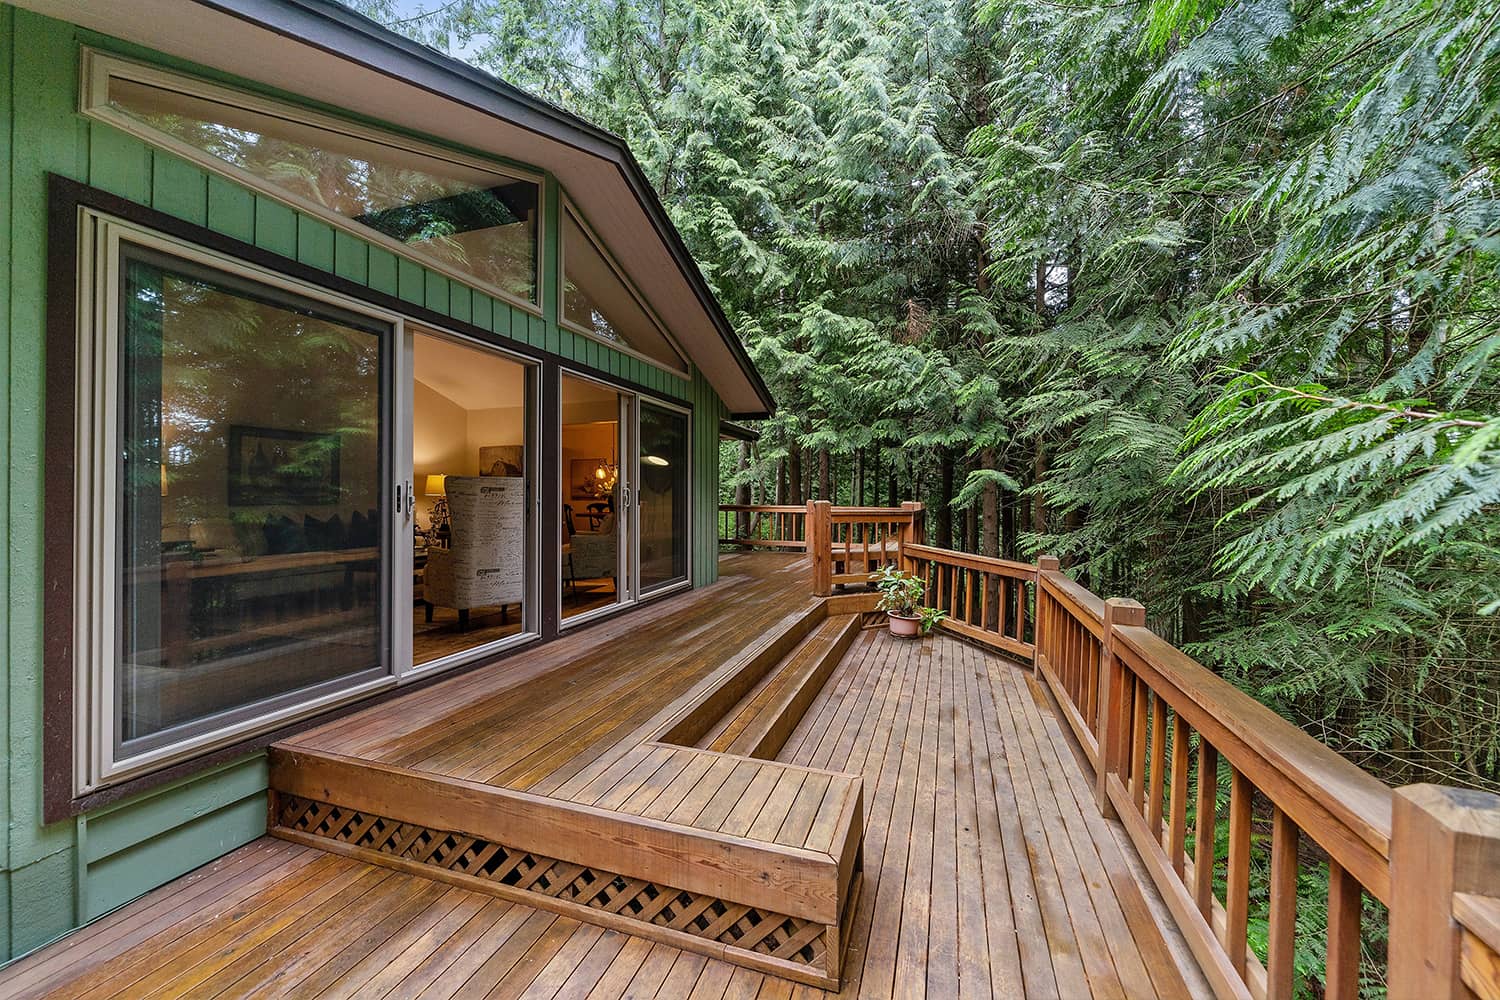 Raised timber deck in garden surrounded by pine trees